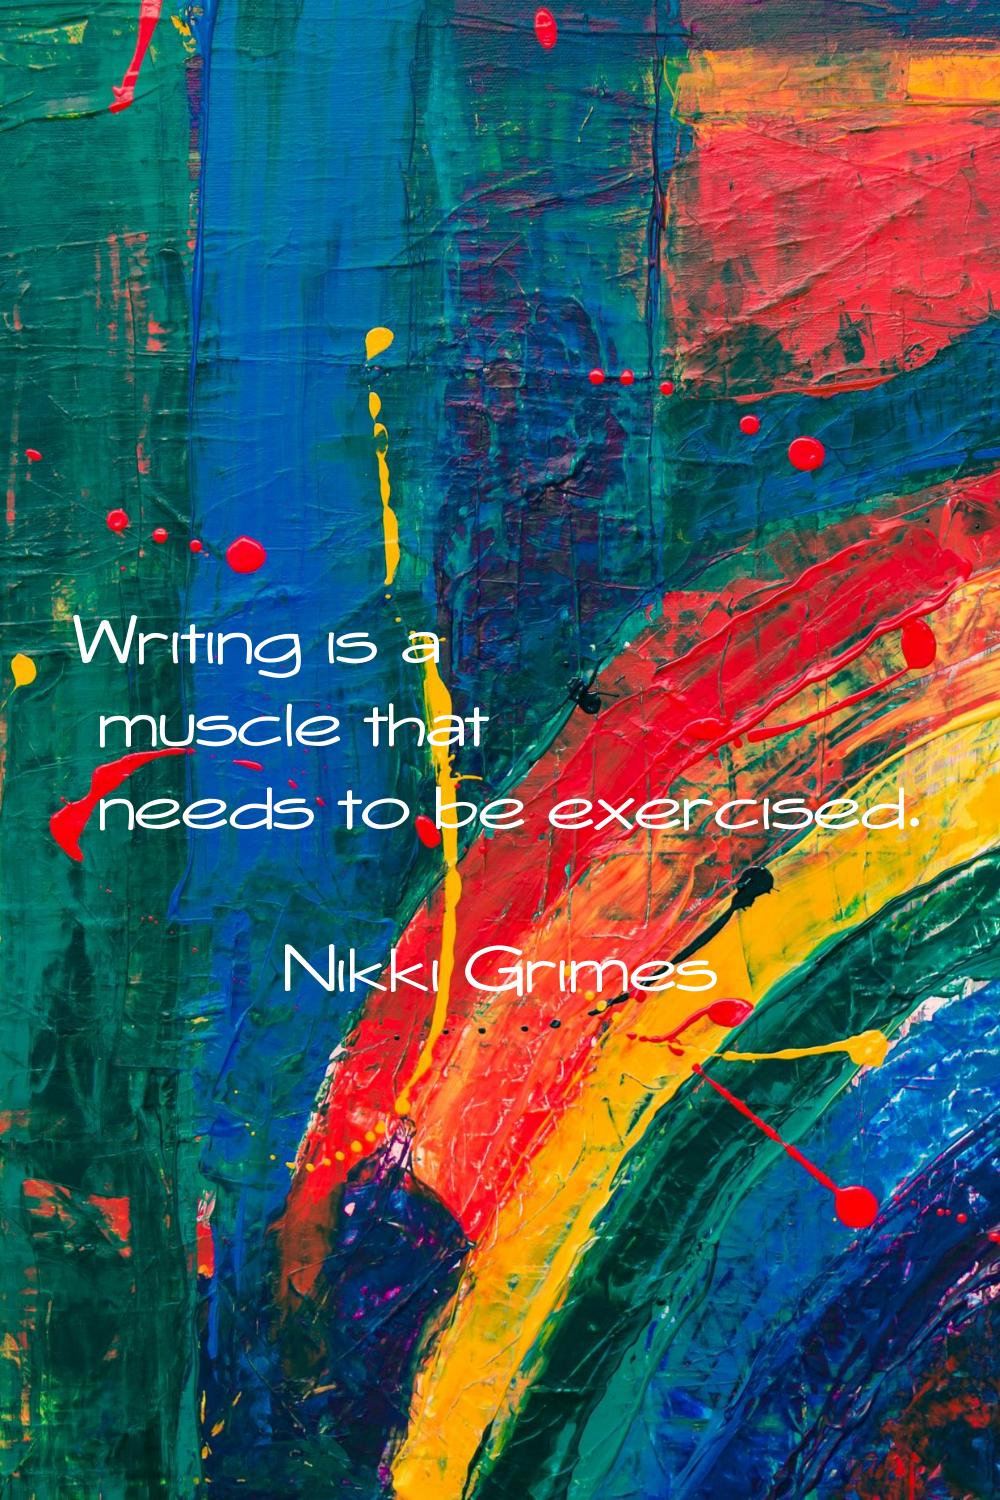 Writing is a muscle that needs to be exercised.